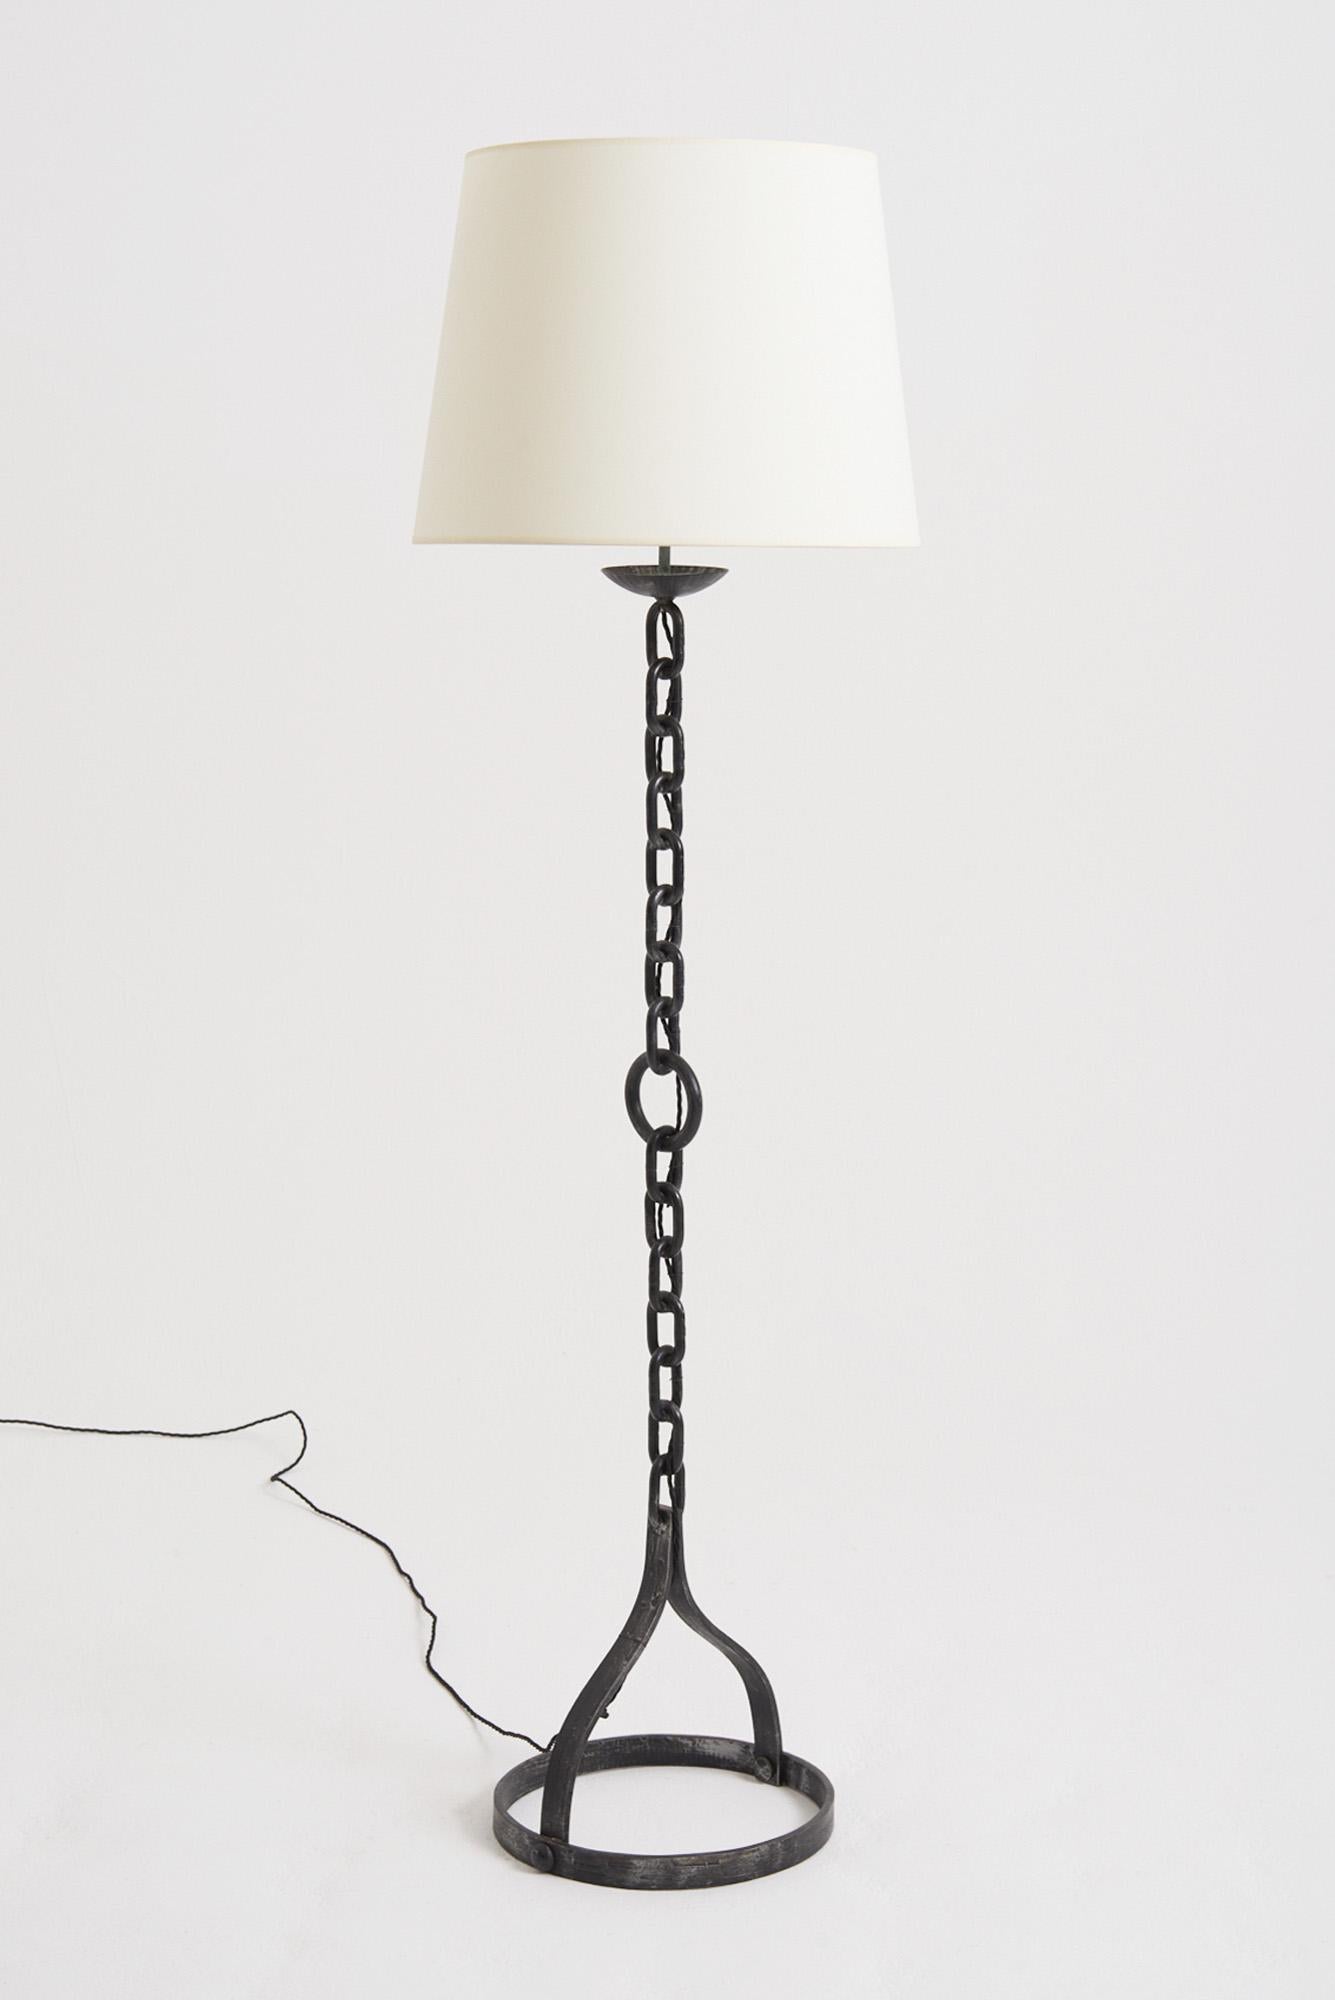 A chain links floor lamp
France, Mid 20th Century
With the shade: 66 cm high by 46 cm diameter
Lamp base only: 146 cm high by 36 cm diameter